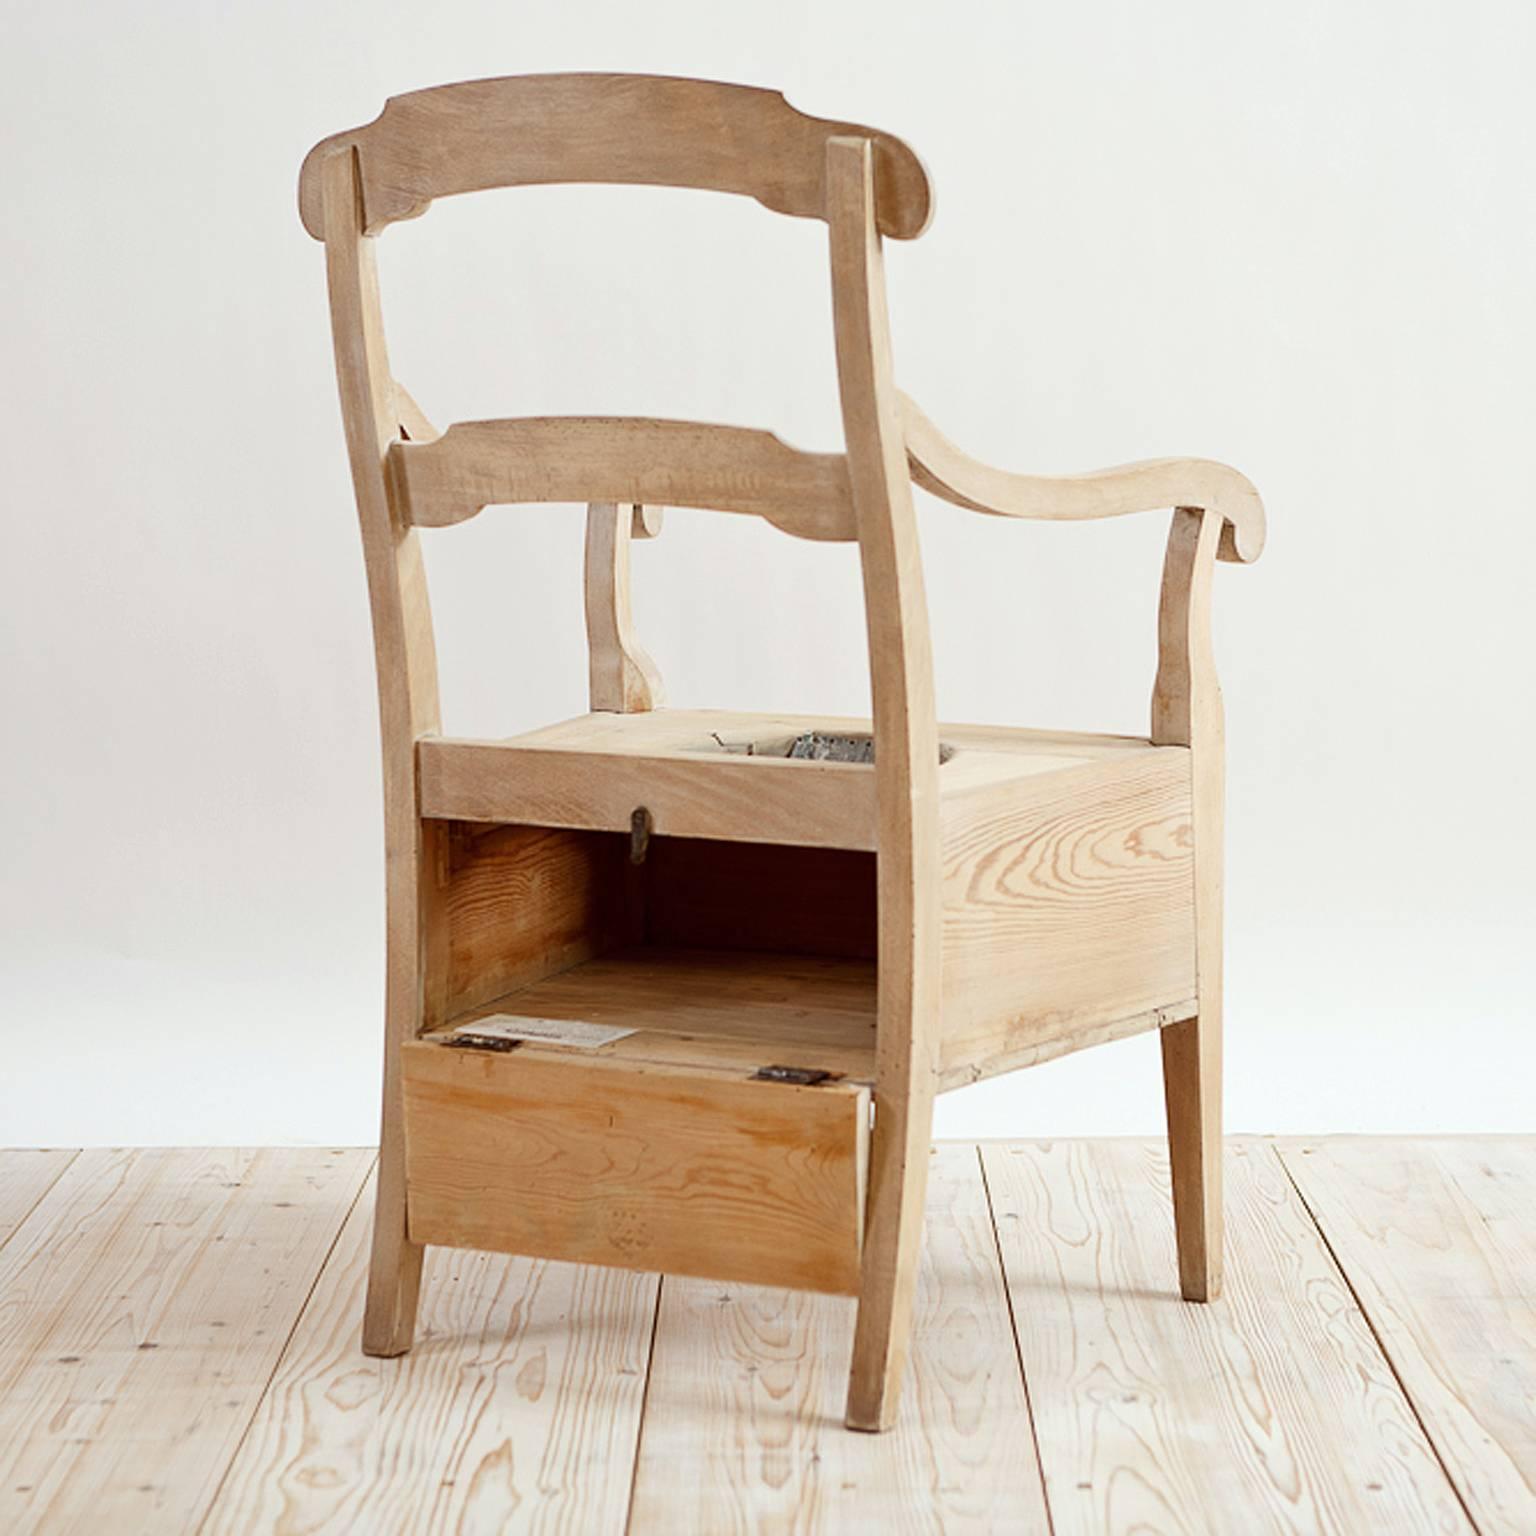 Swedish North German Potty Chair in Pine with Chalk Finish and Upholstered Seat, c. 1820